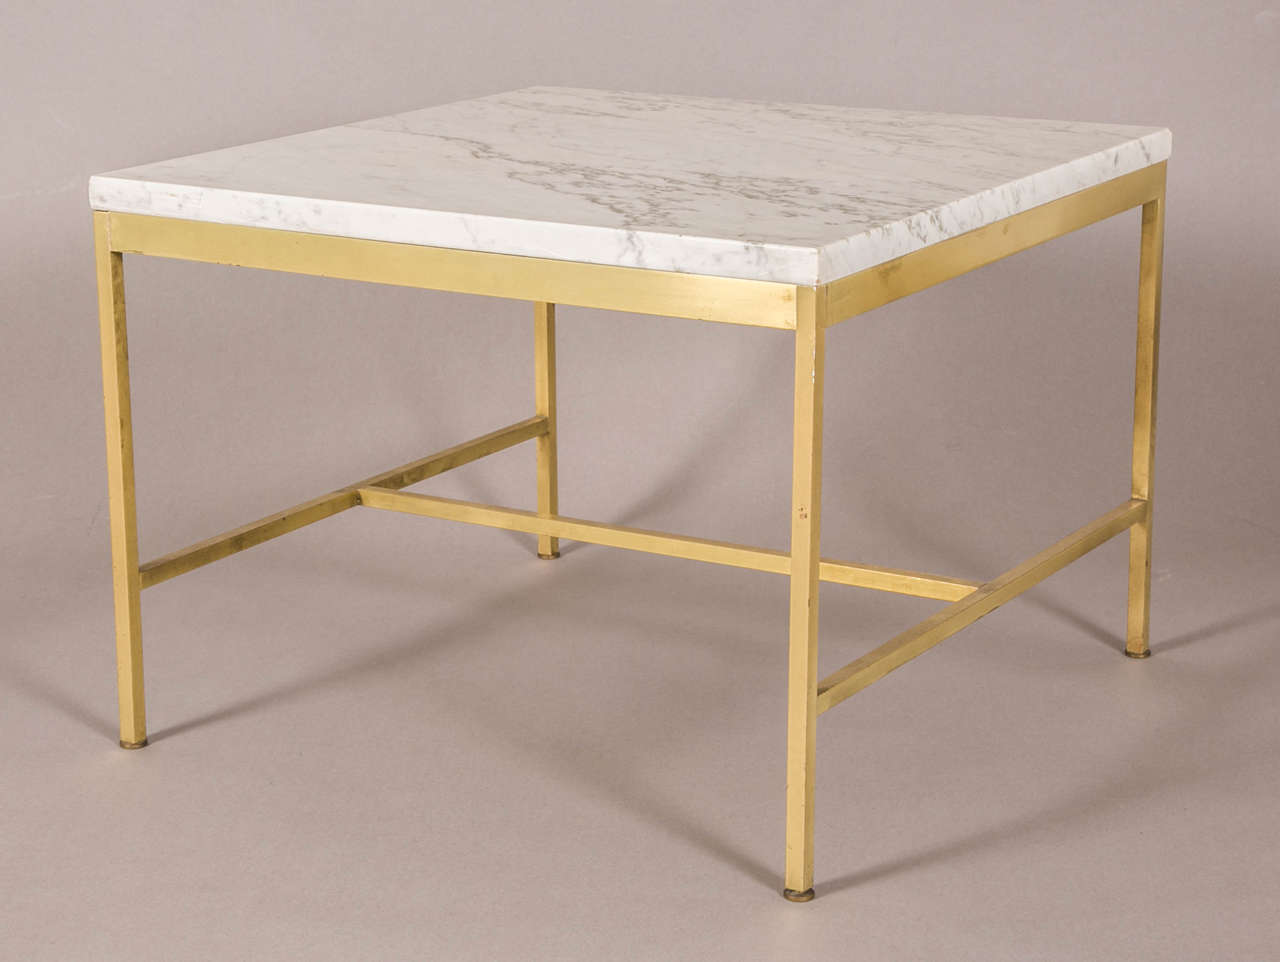 Brass Pair of Square Coffee Tables by Paul McCobb 1960-1970